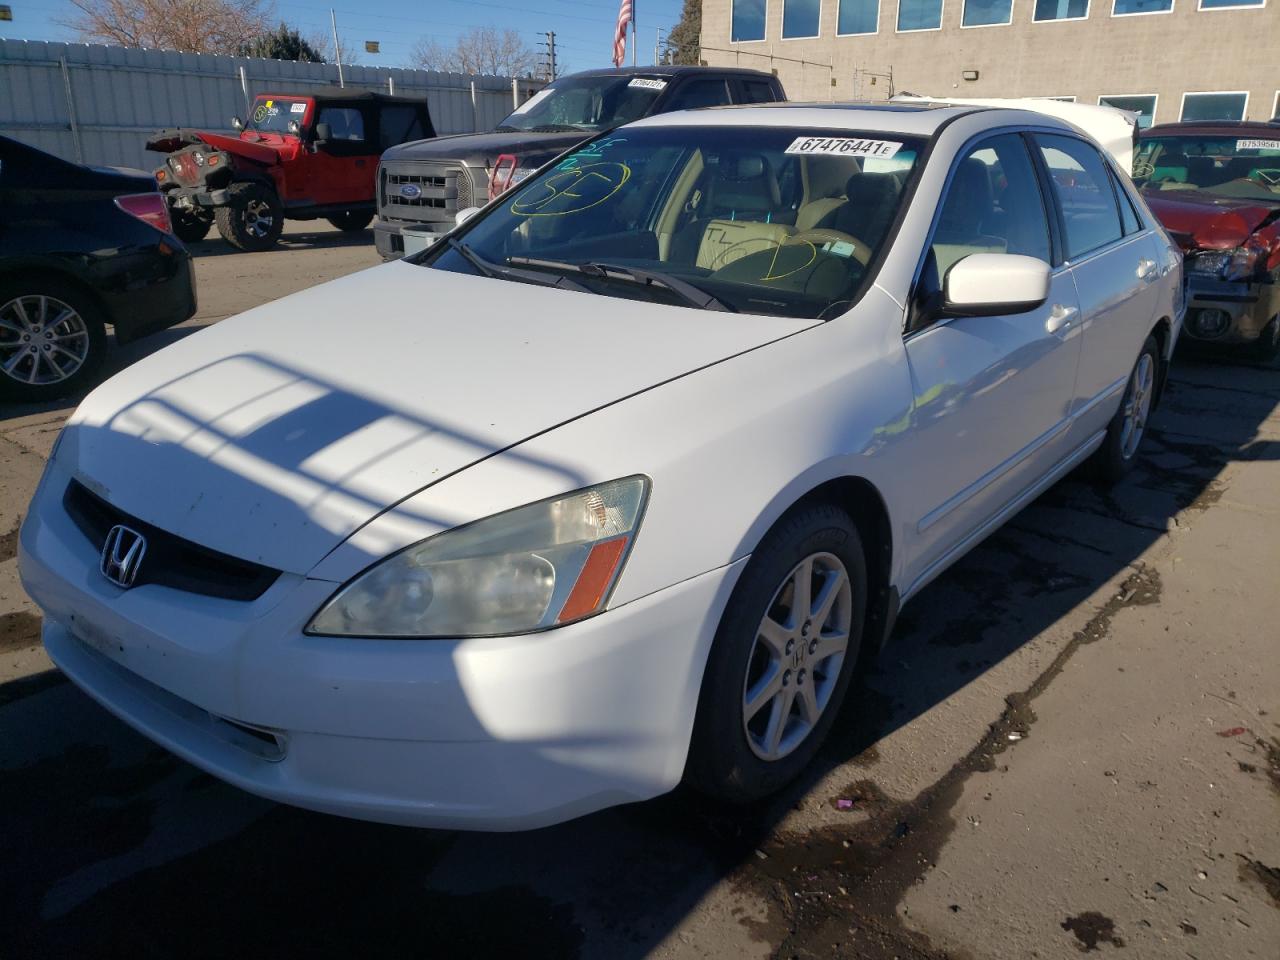 2004 HONDA ACCORD VIN 1HGCM66554A018020 from the USA